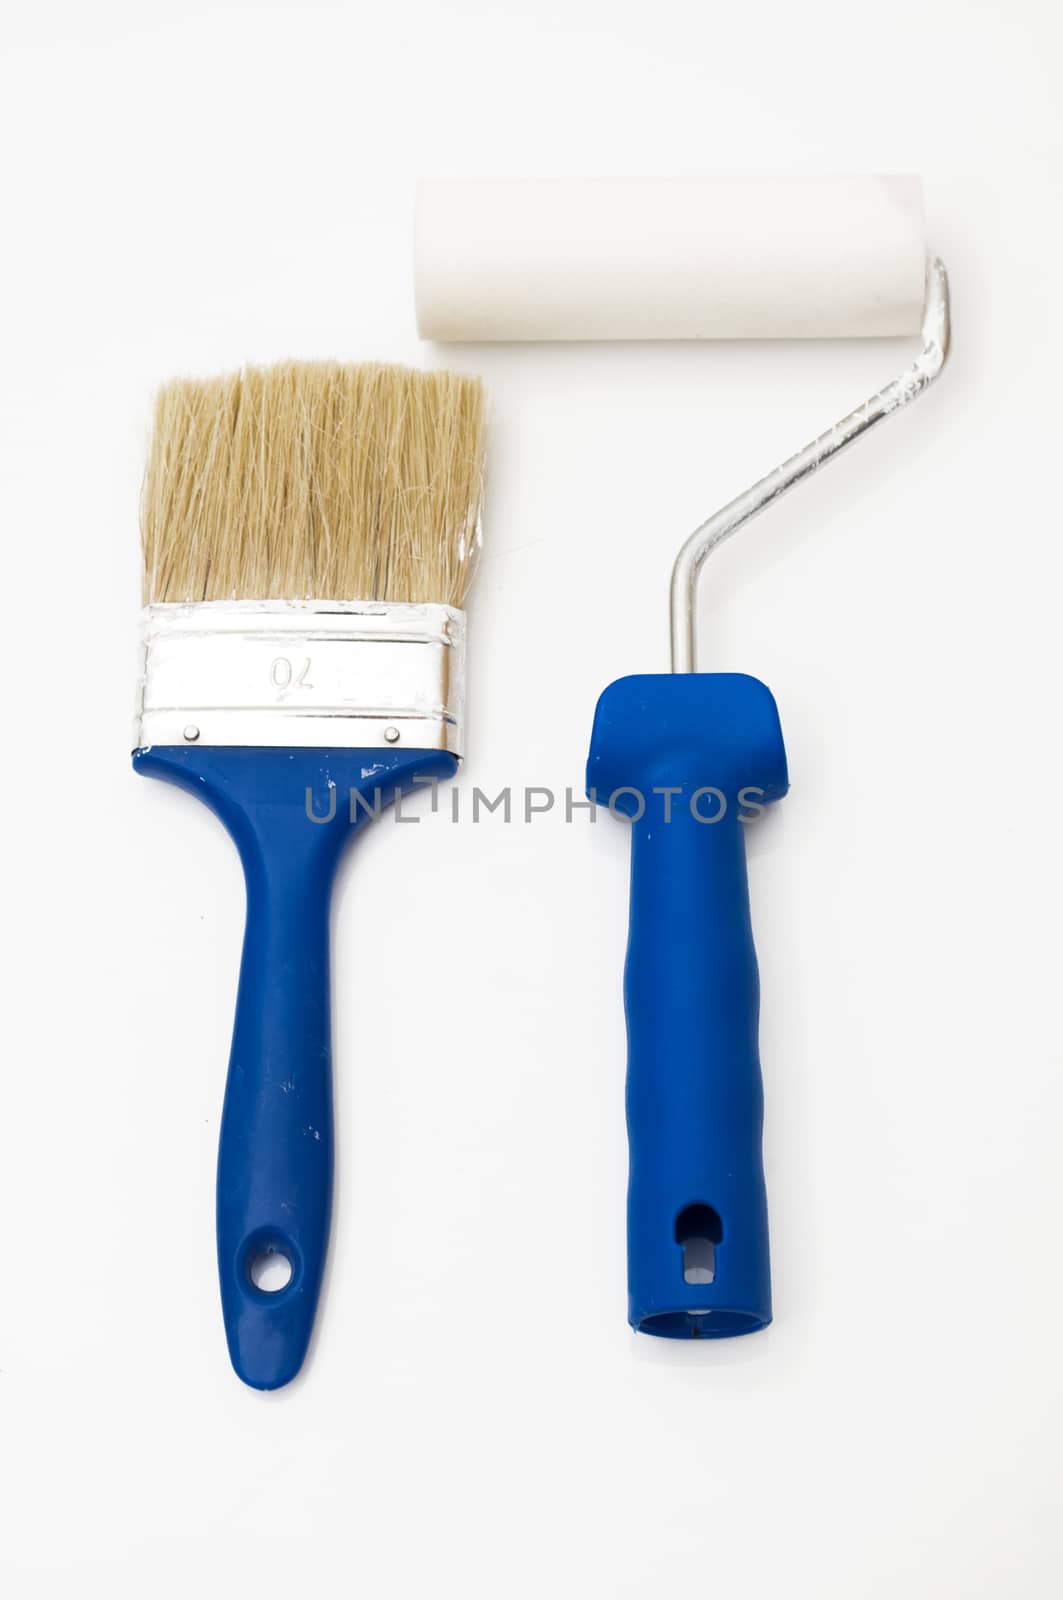 kit of brushes on a white background